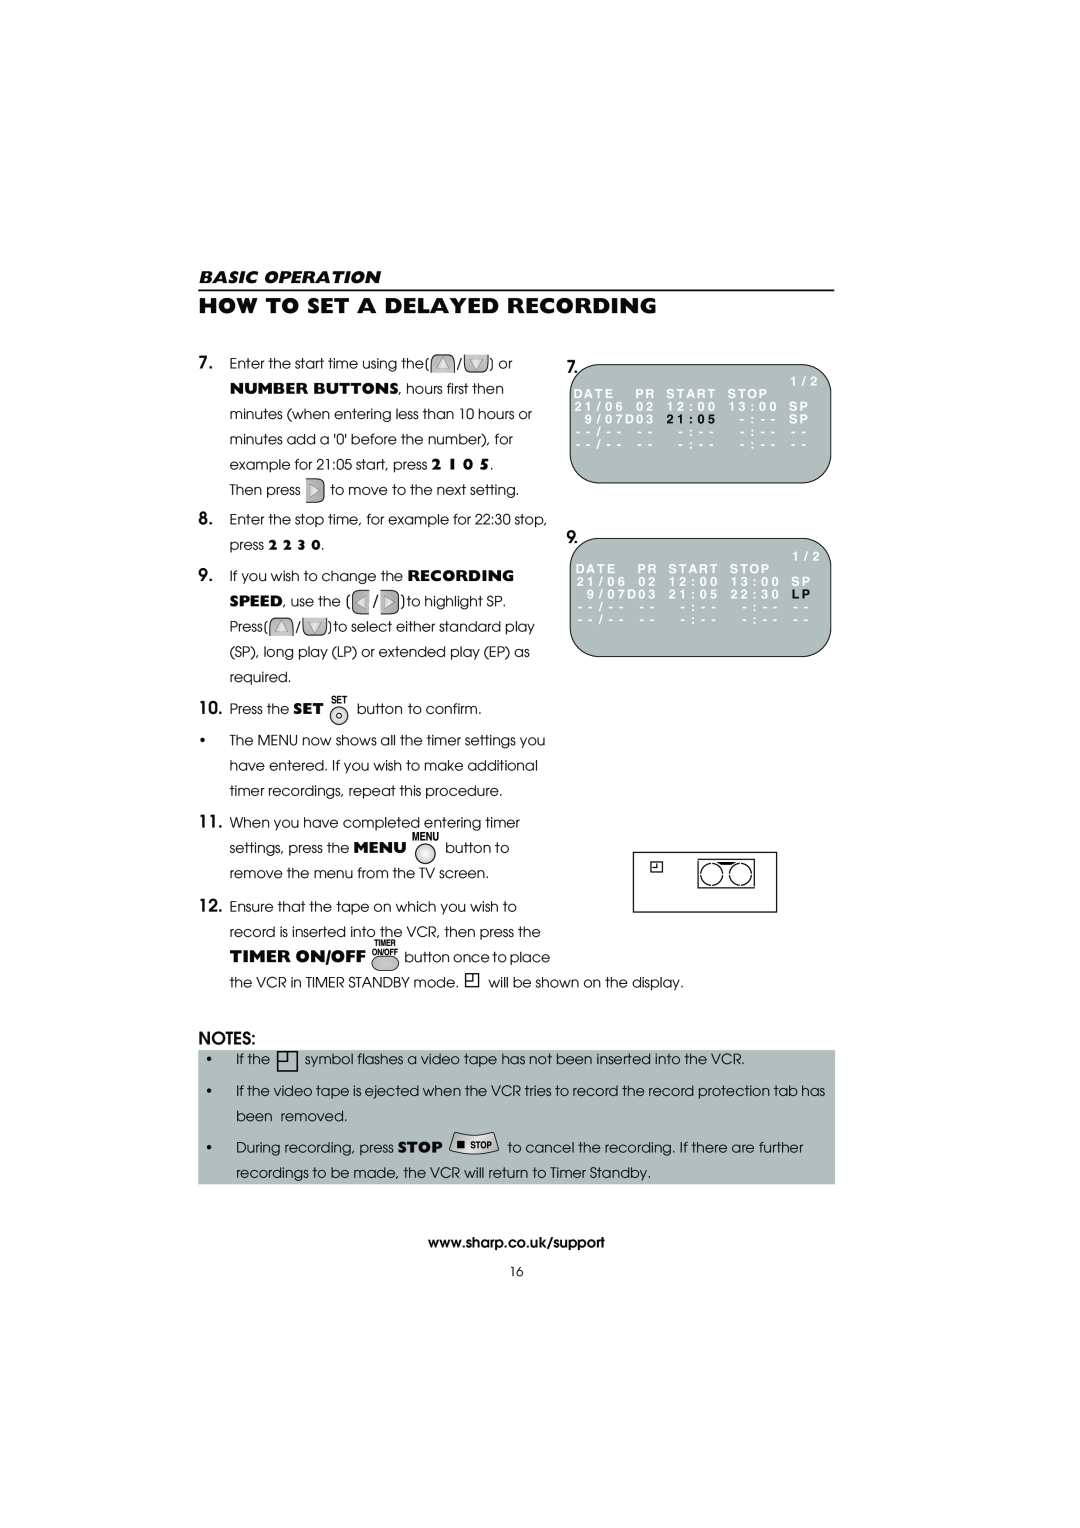 Sharp VC-MH715HM operation manual How To Set A Delayed Recording, Basic Operation 